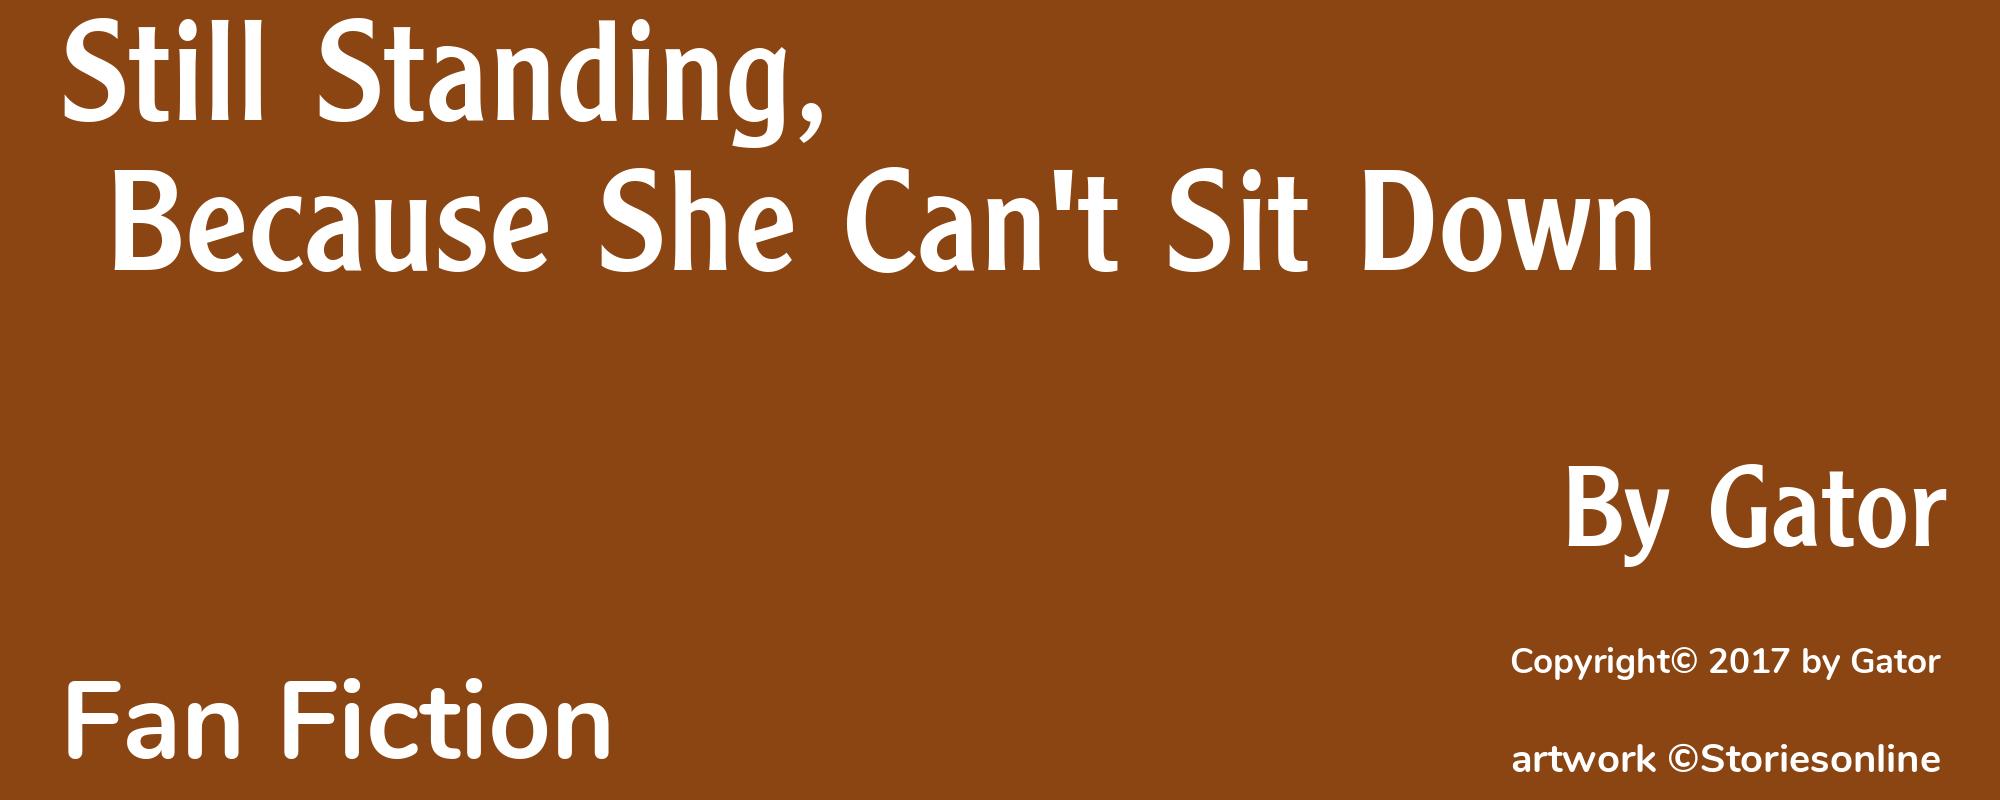 Still Standing, Because She Can't Sit Down - Cover